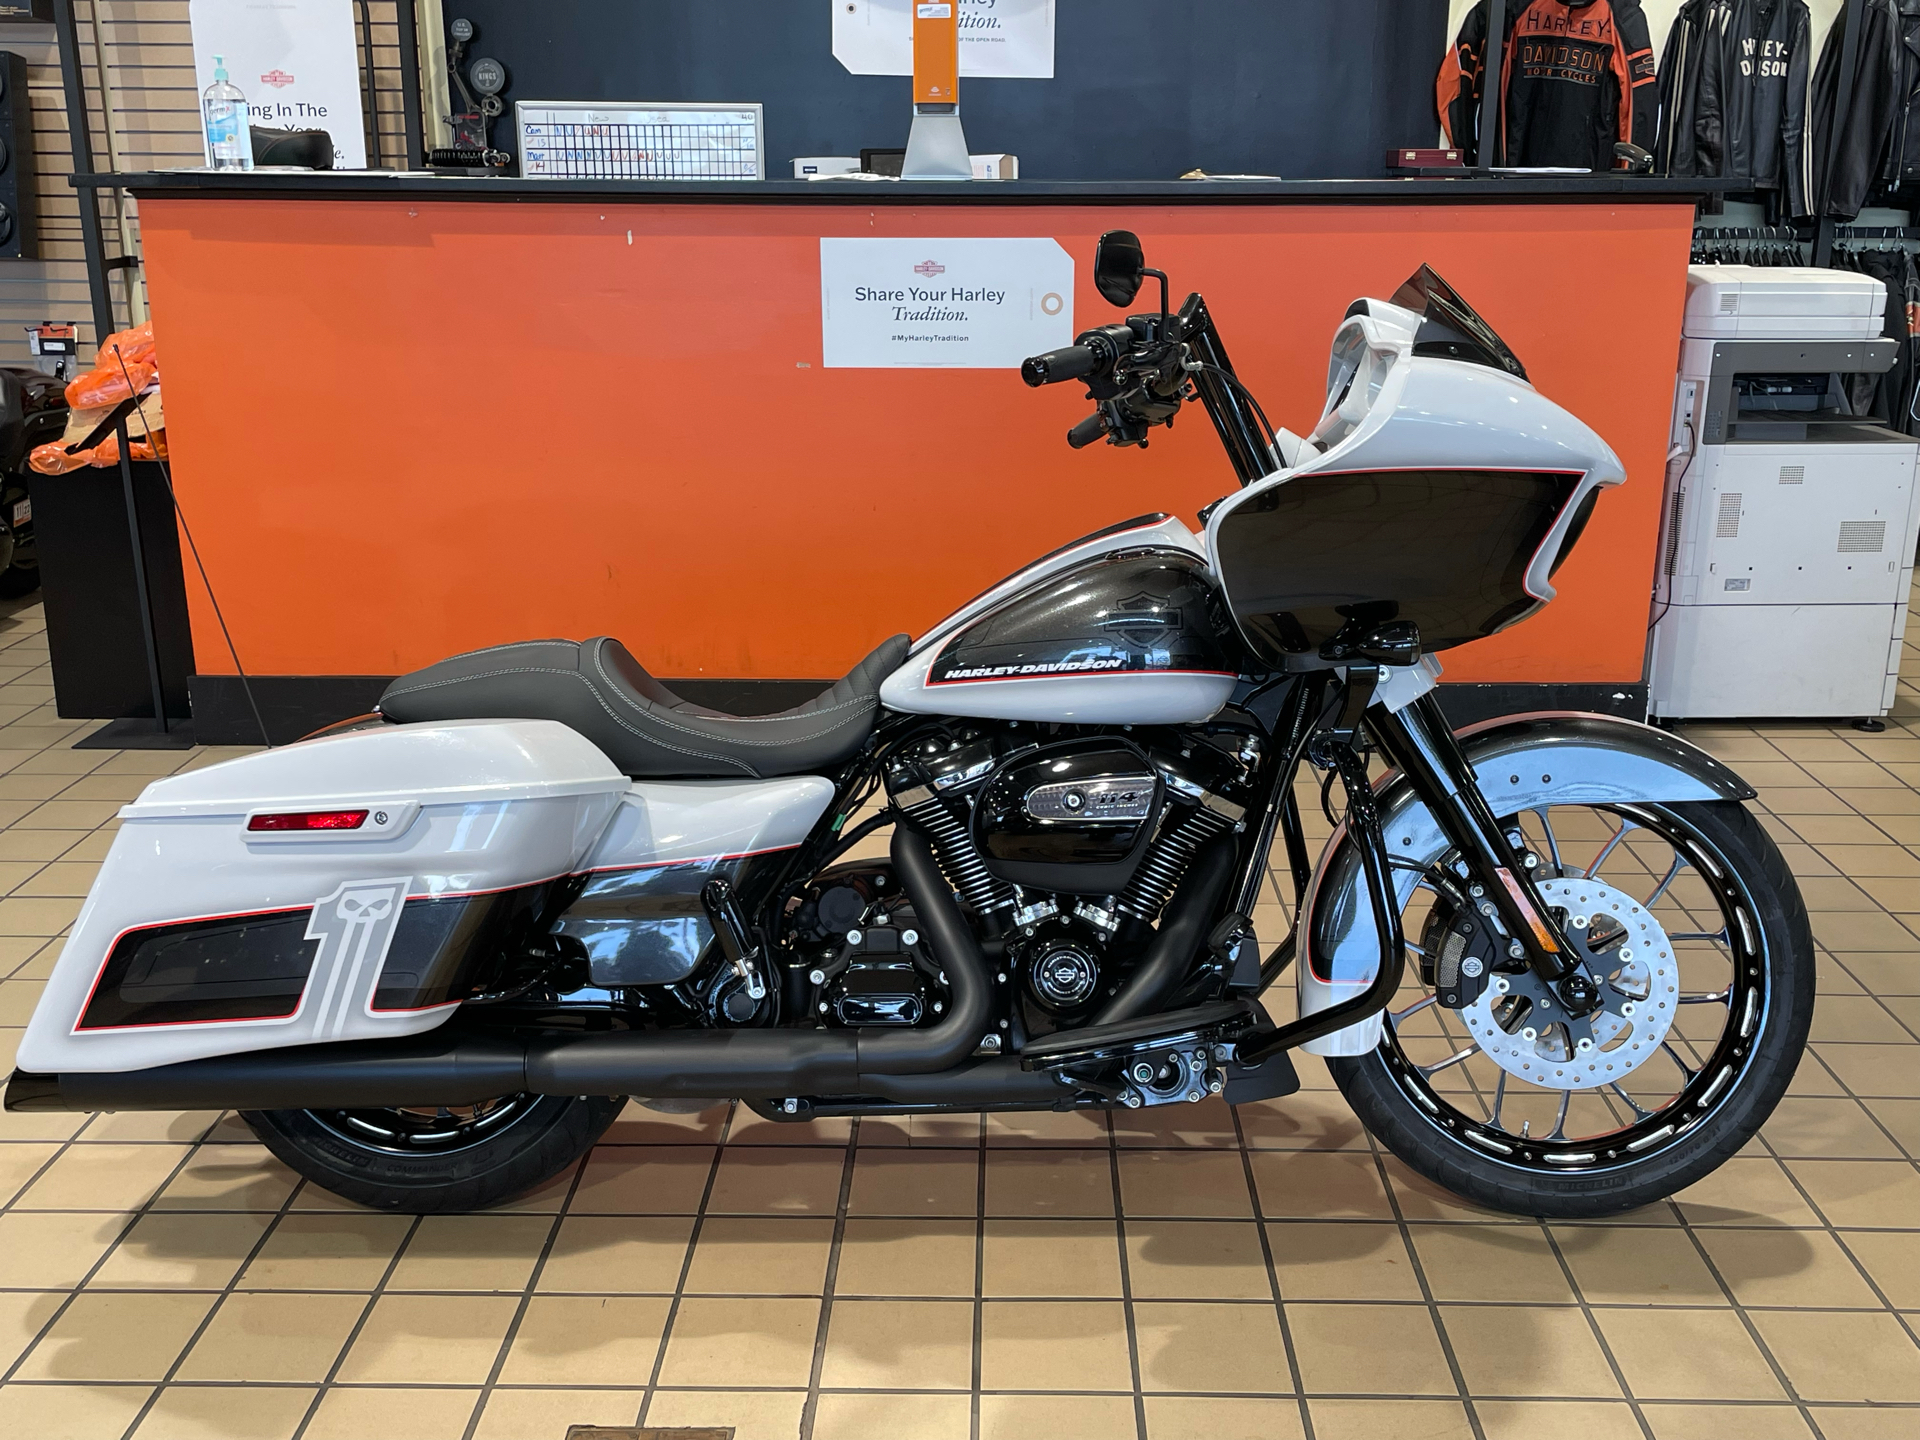 2020 Harley-Davidson Road Glide® Special in Dumfries, Virginia - Photo 2